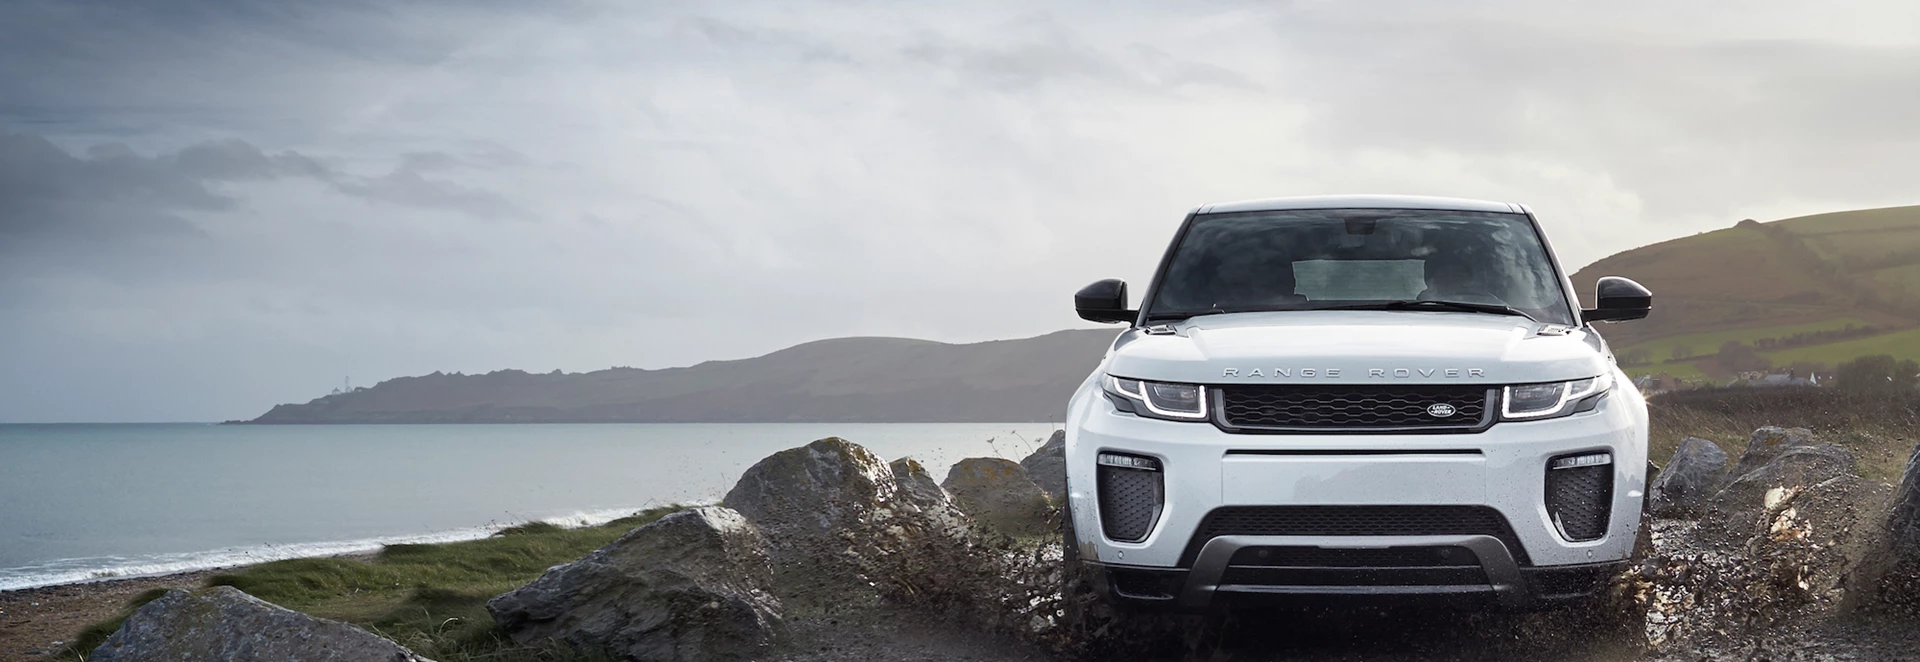 Buyer’s guide to the Range Rover Evoque 